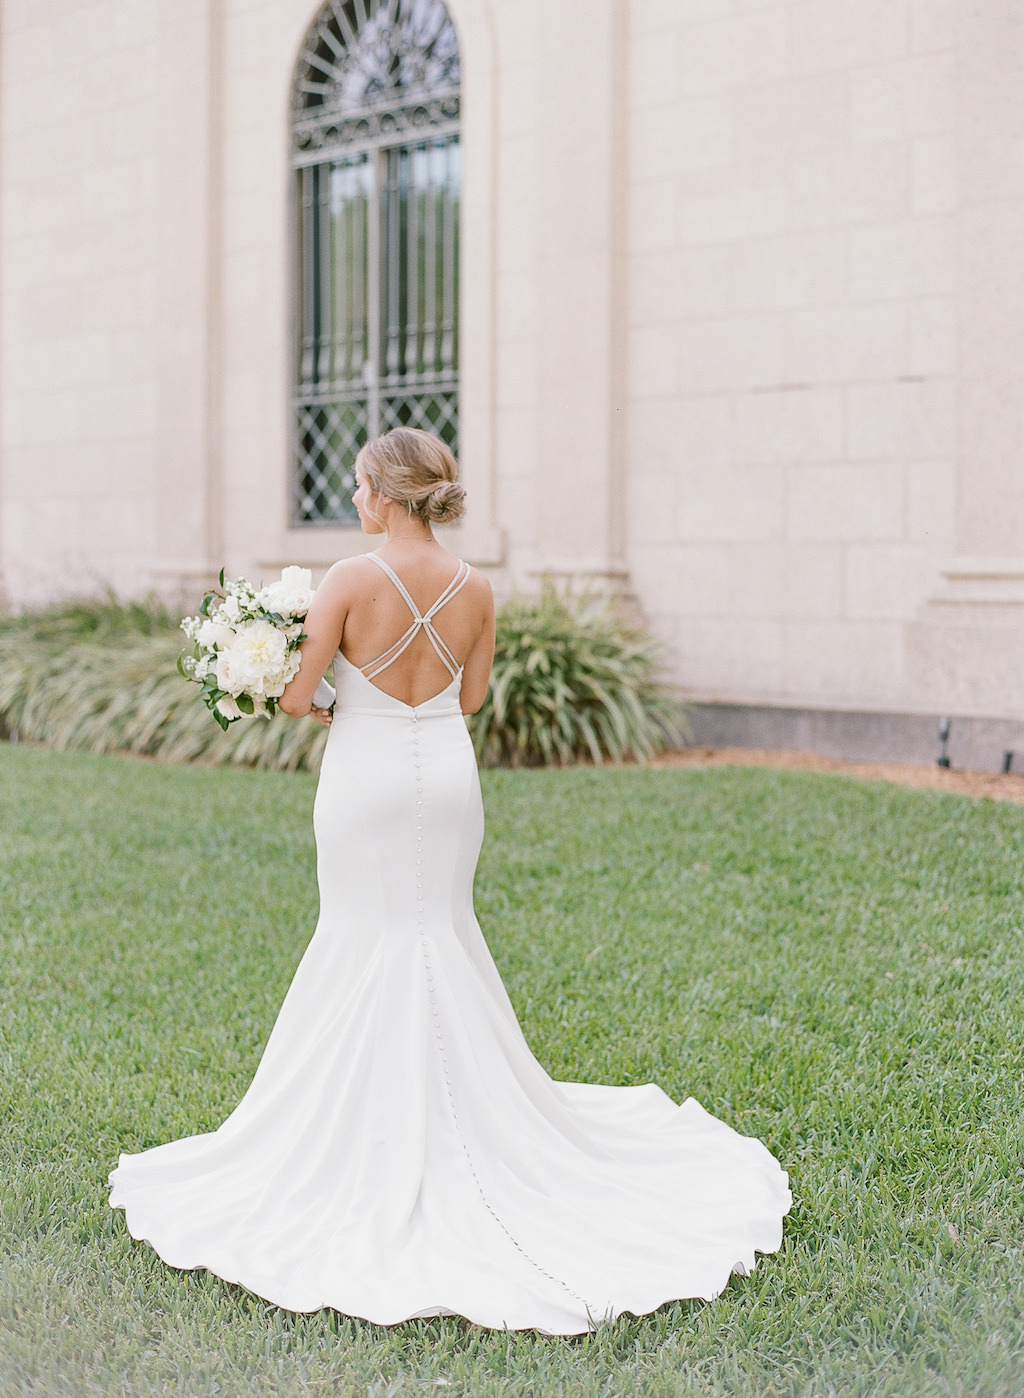 Tampa Bay Bride in Classy Fitted Open Back with Rhinestone Straps and Buttons Wedding Dress Holding White, Ivory, Blush Pink Roses and Greenery Floral Bouquet